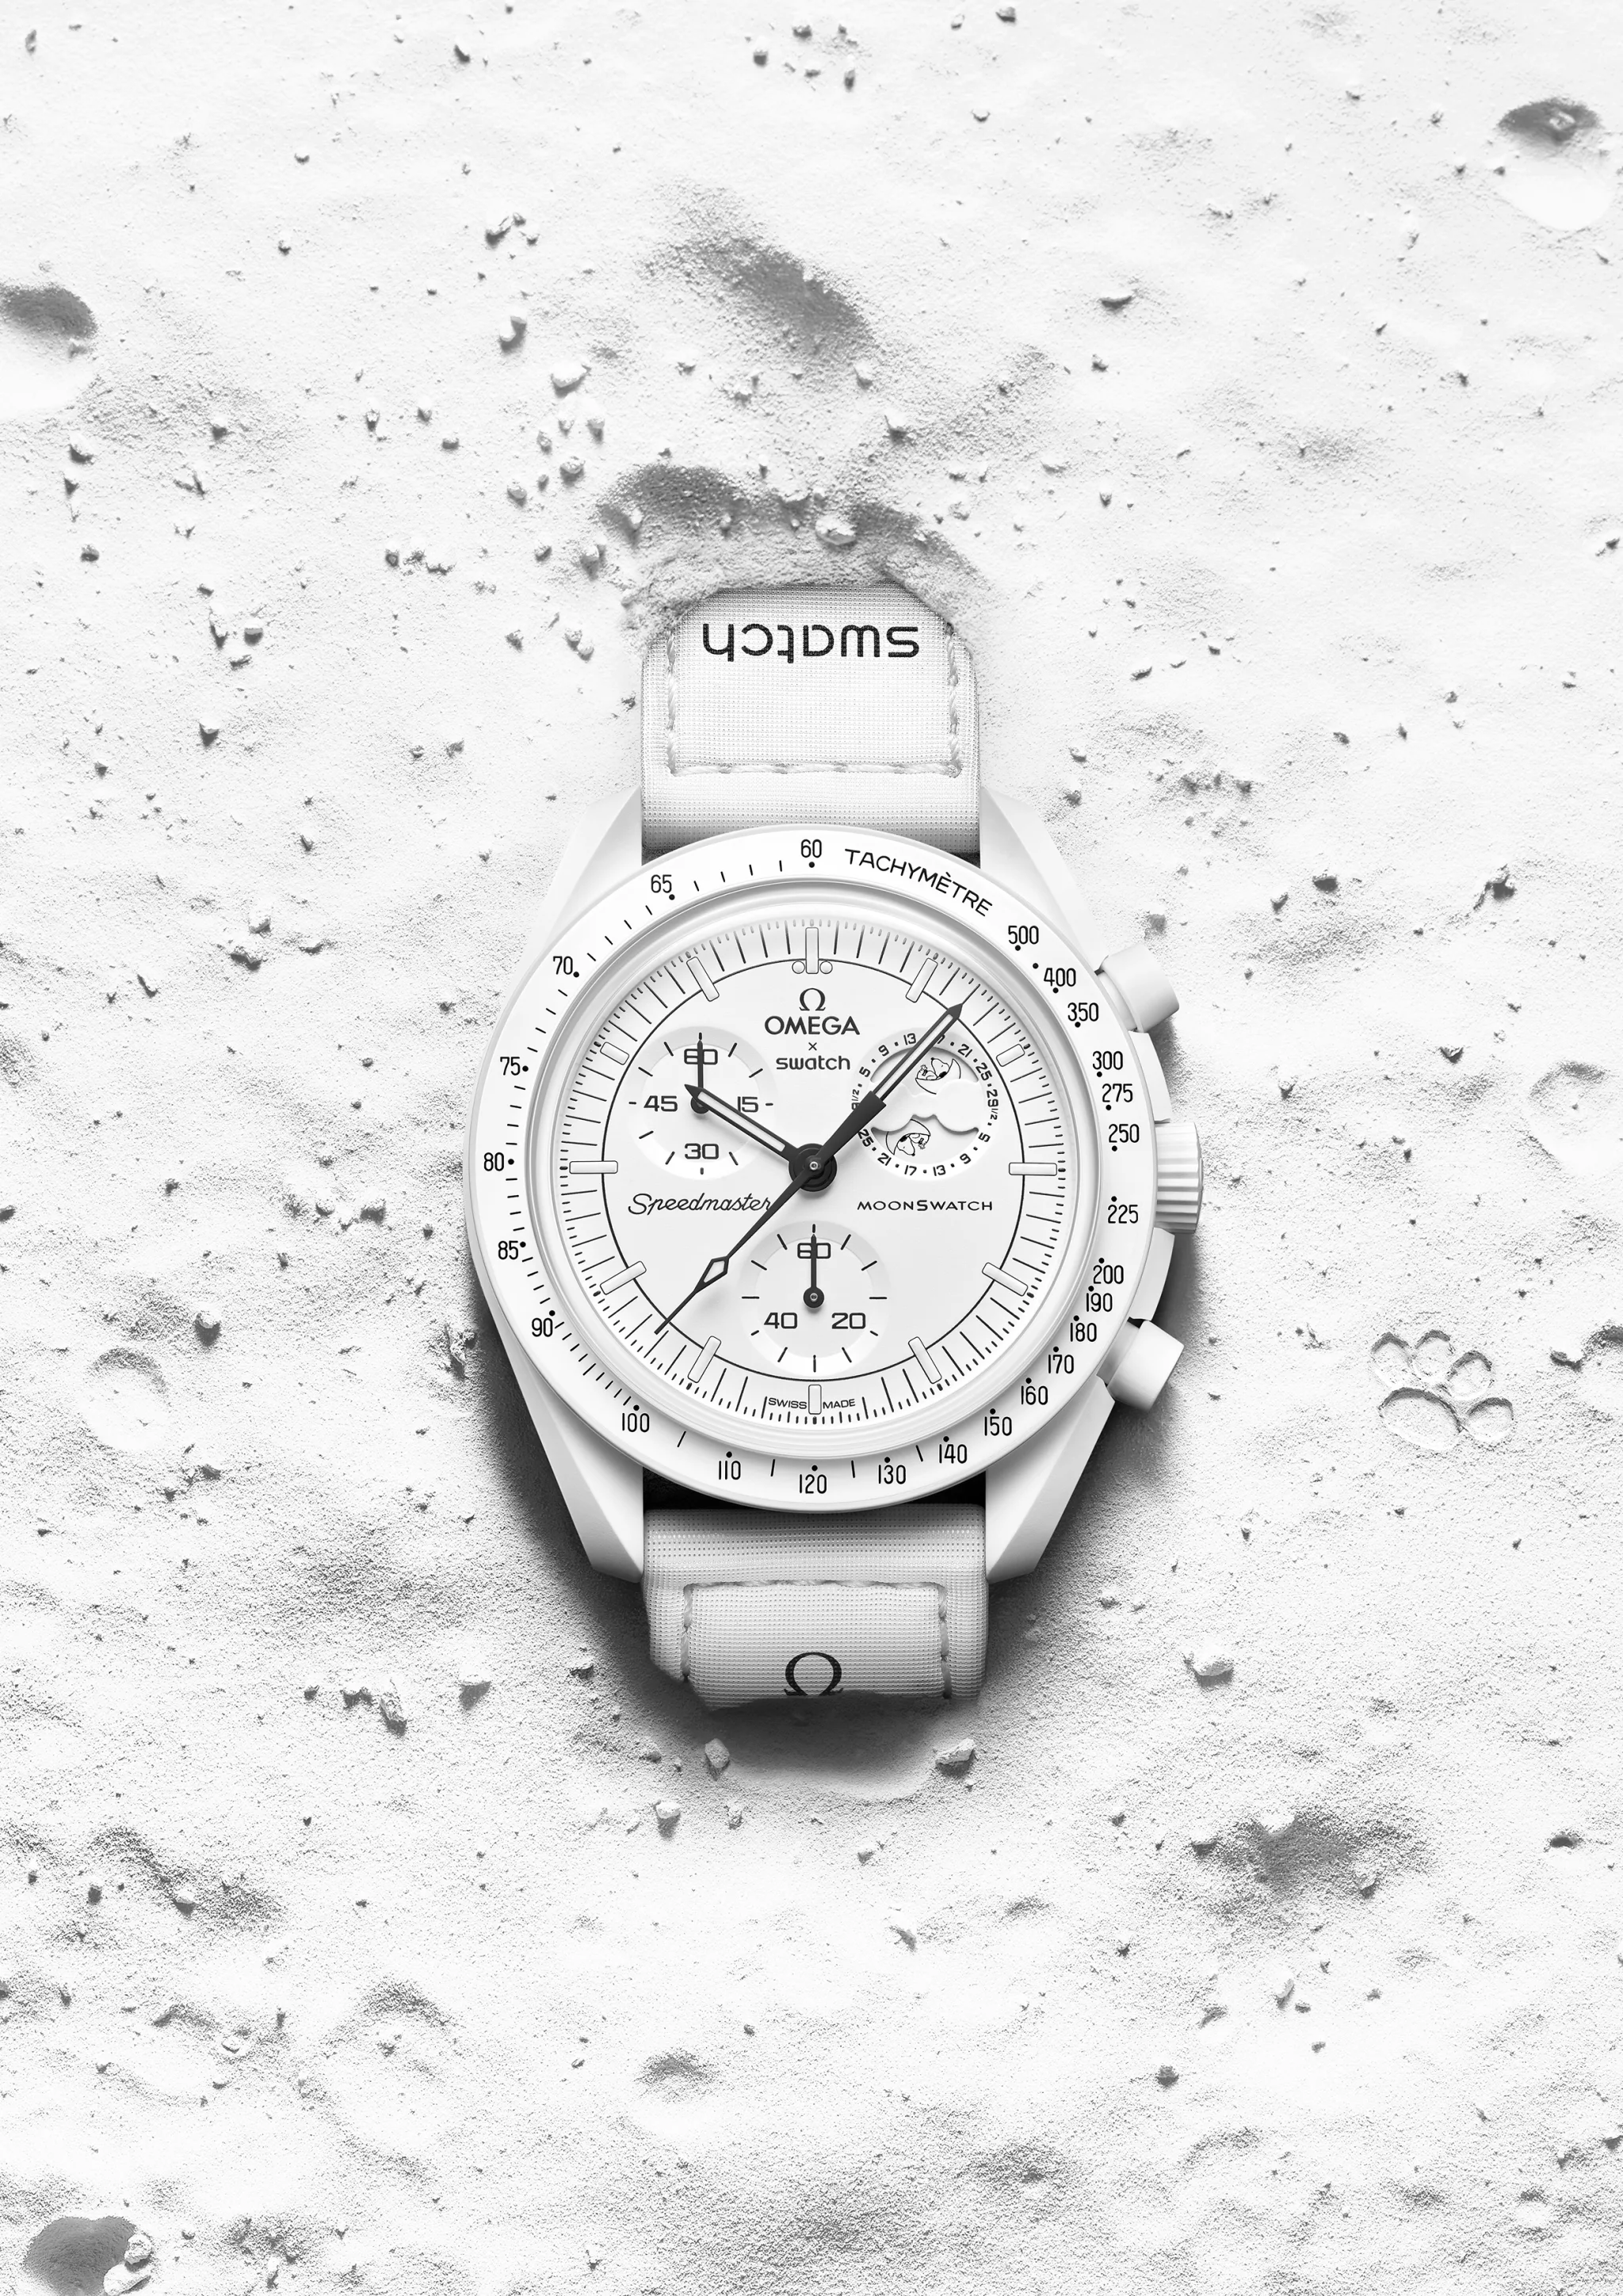 A new lunar landing for the Bioceramic MoonSwatch - with a moon phase watch